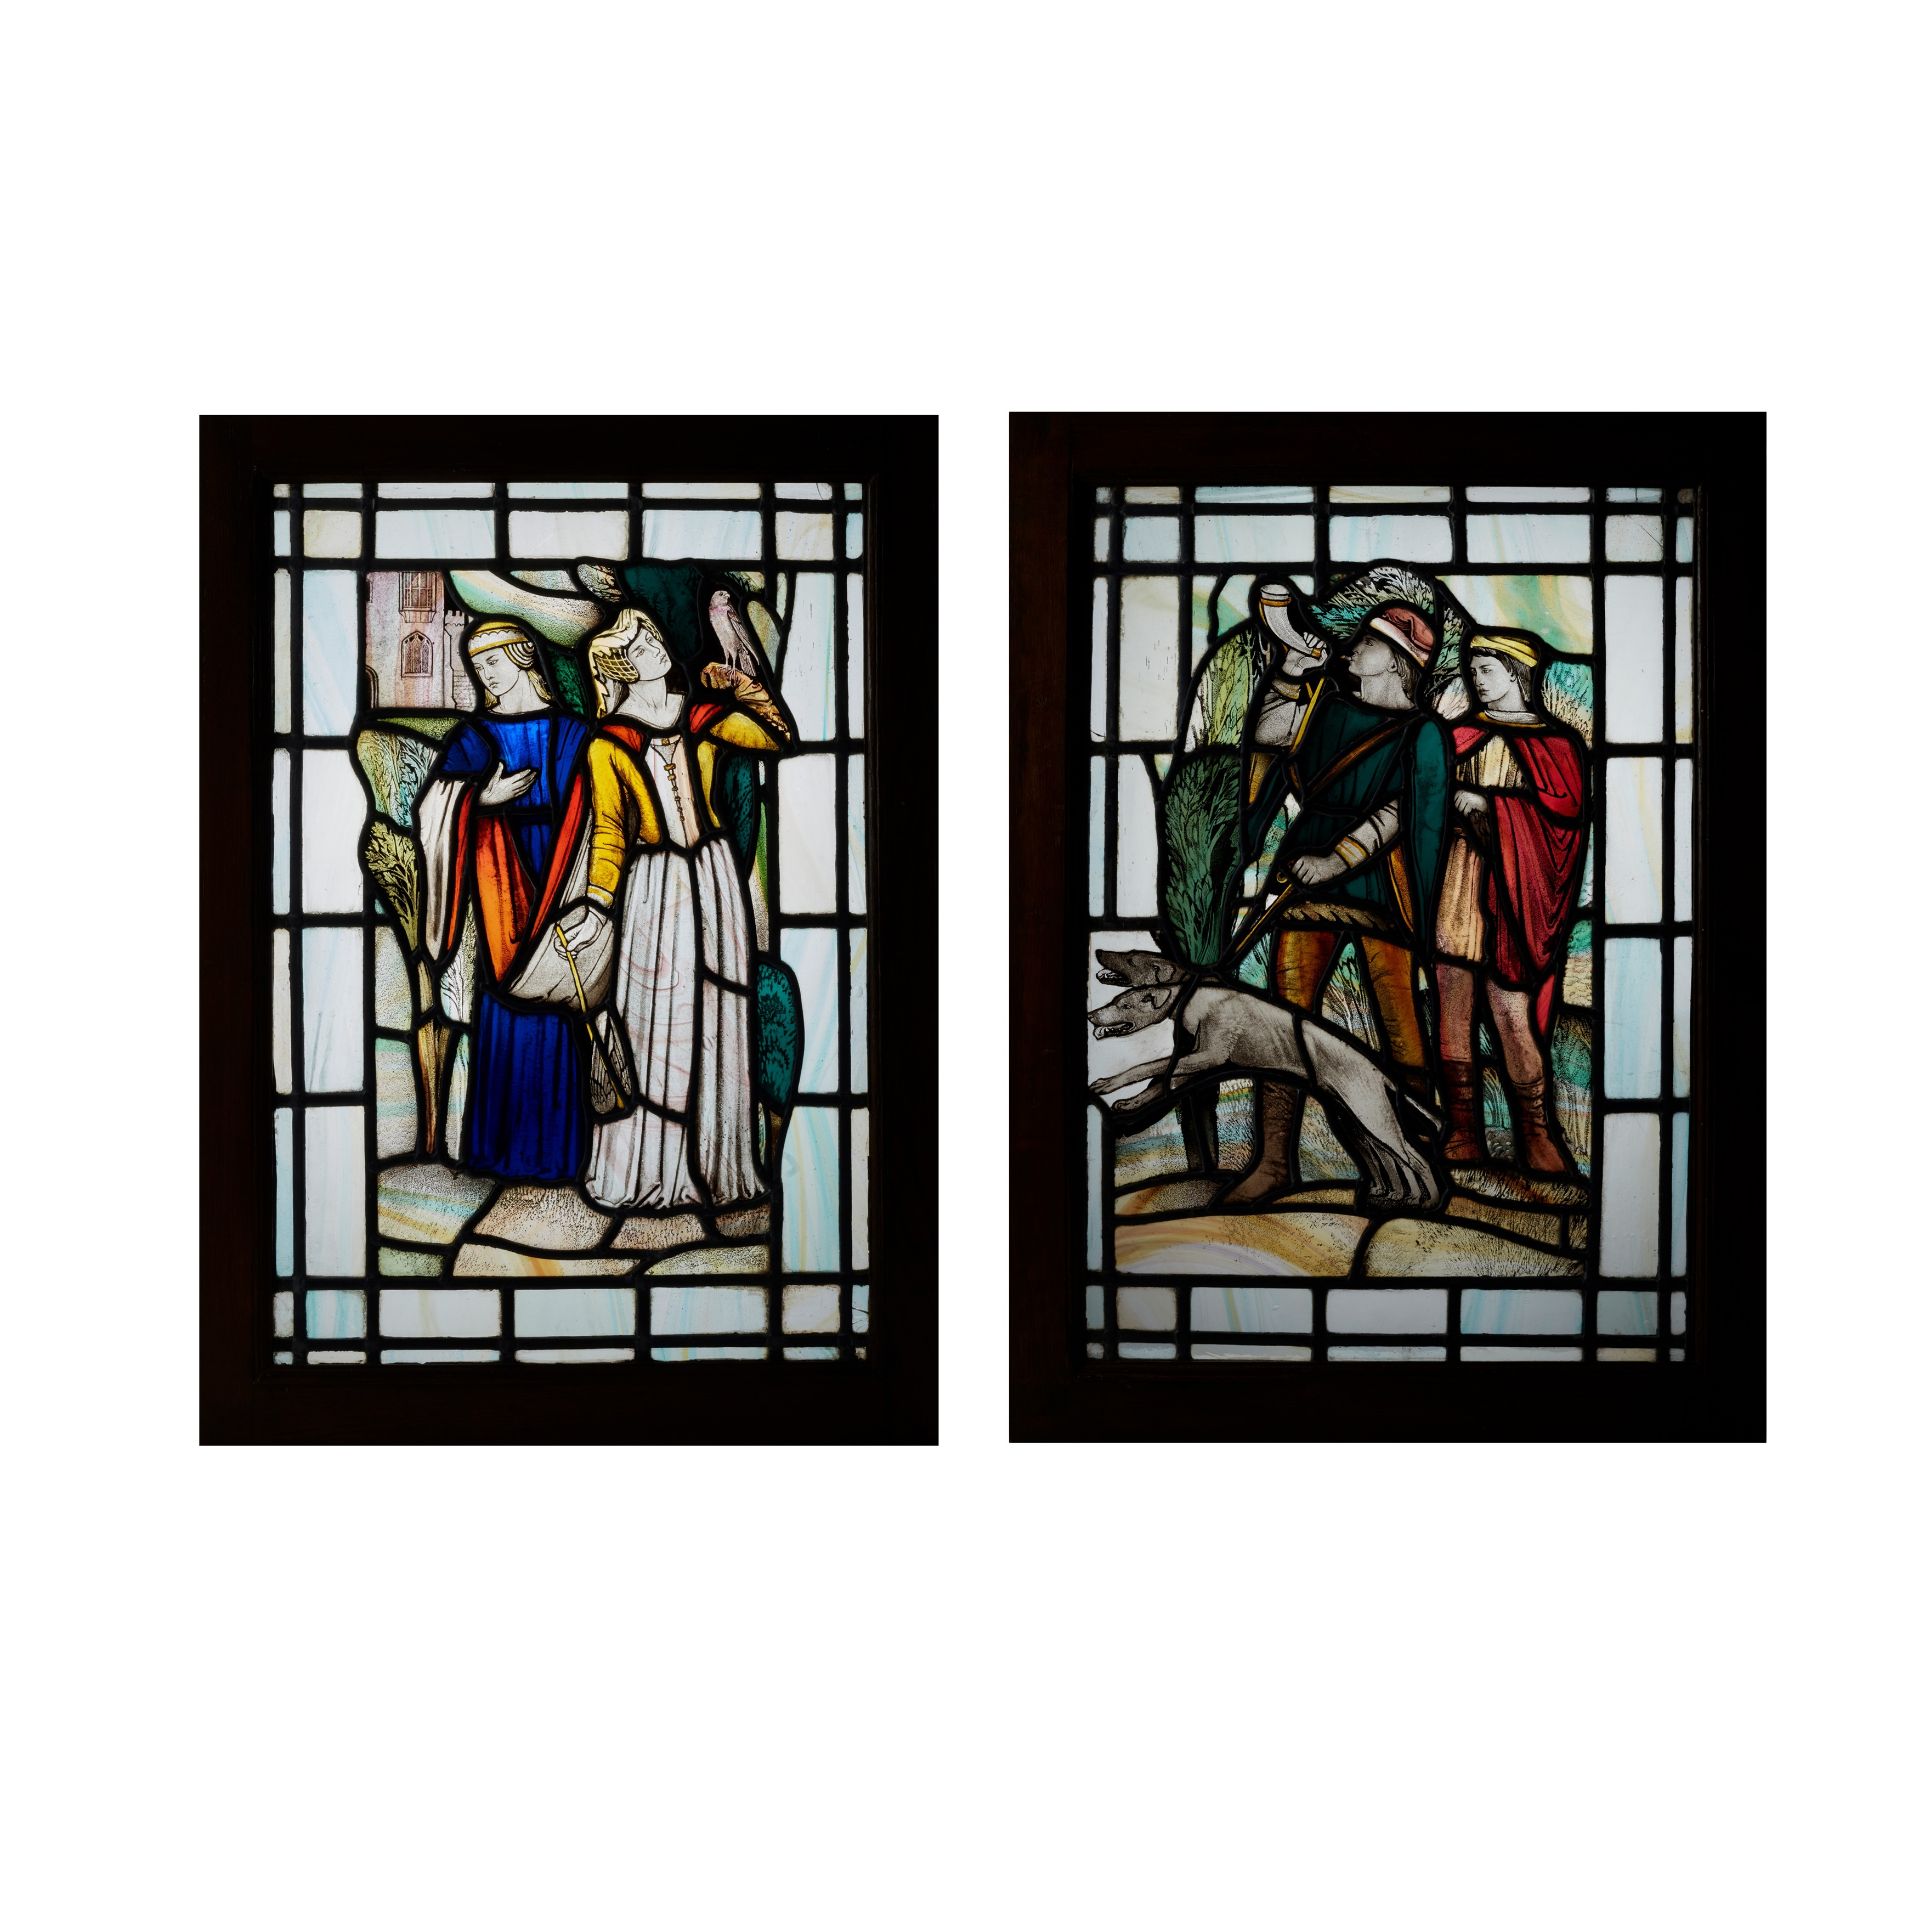 EDWARD WOORE (1880-1960) PAIR OF ARTS & CRAFTS STAINED GLASS PANELS, CIRCA 1926